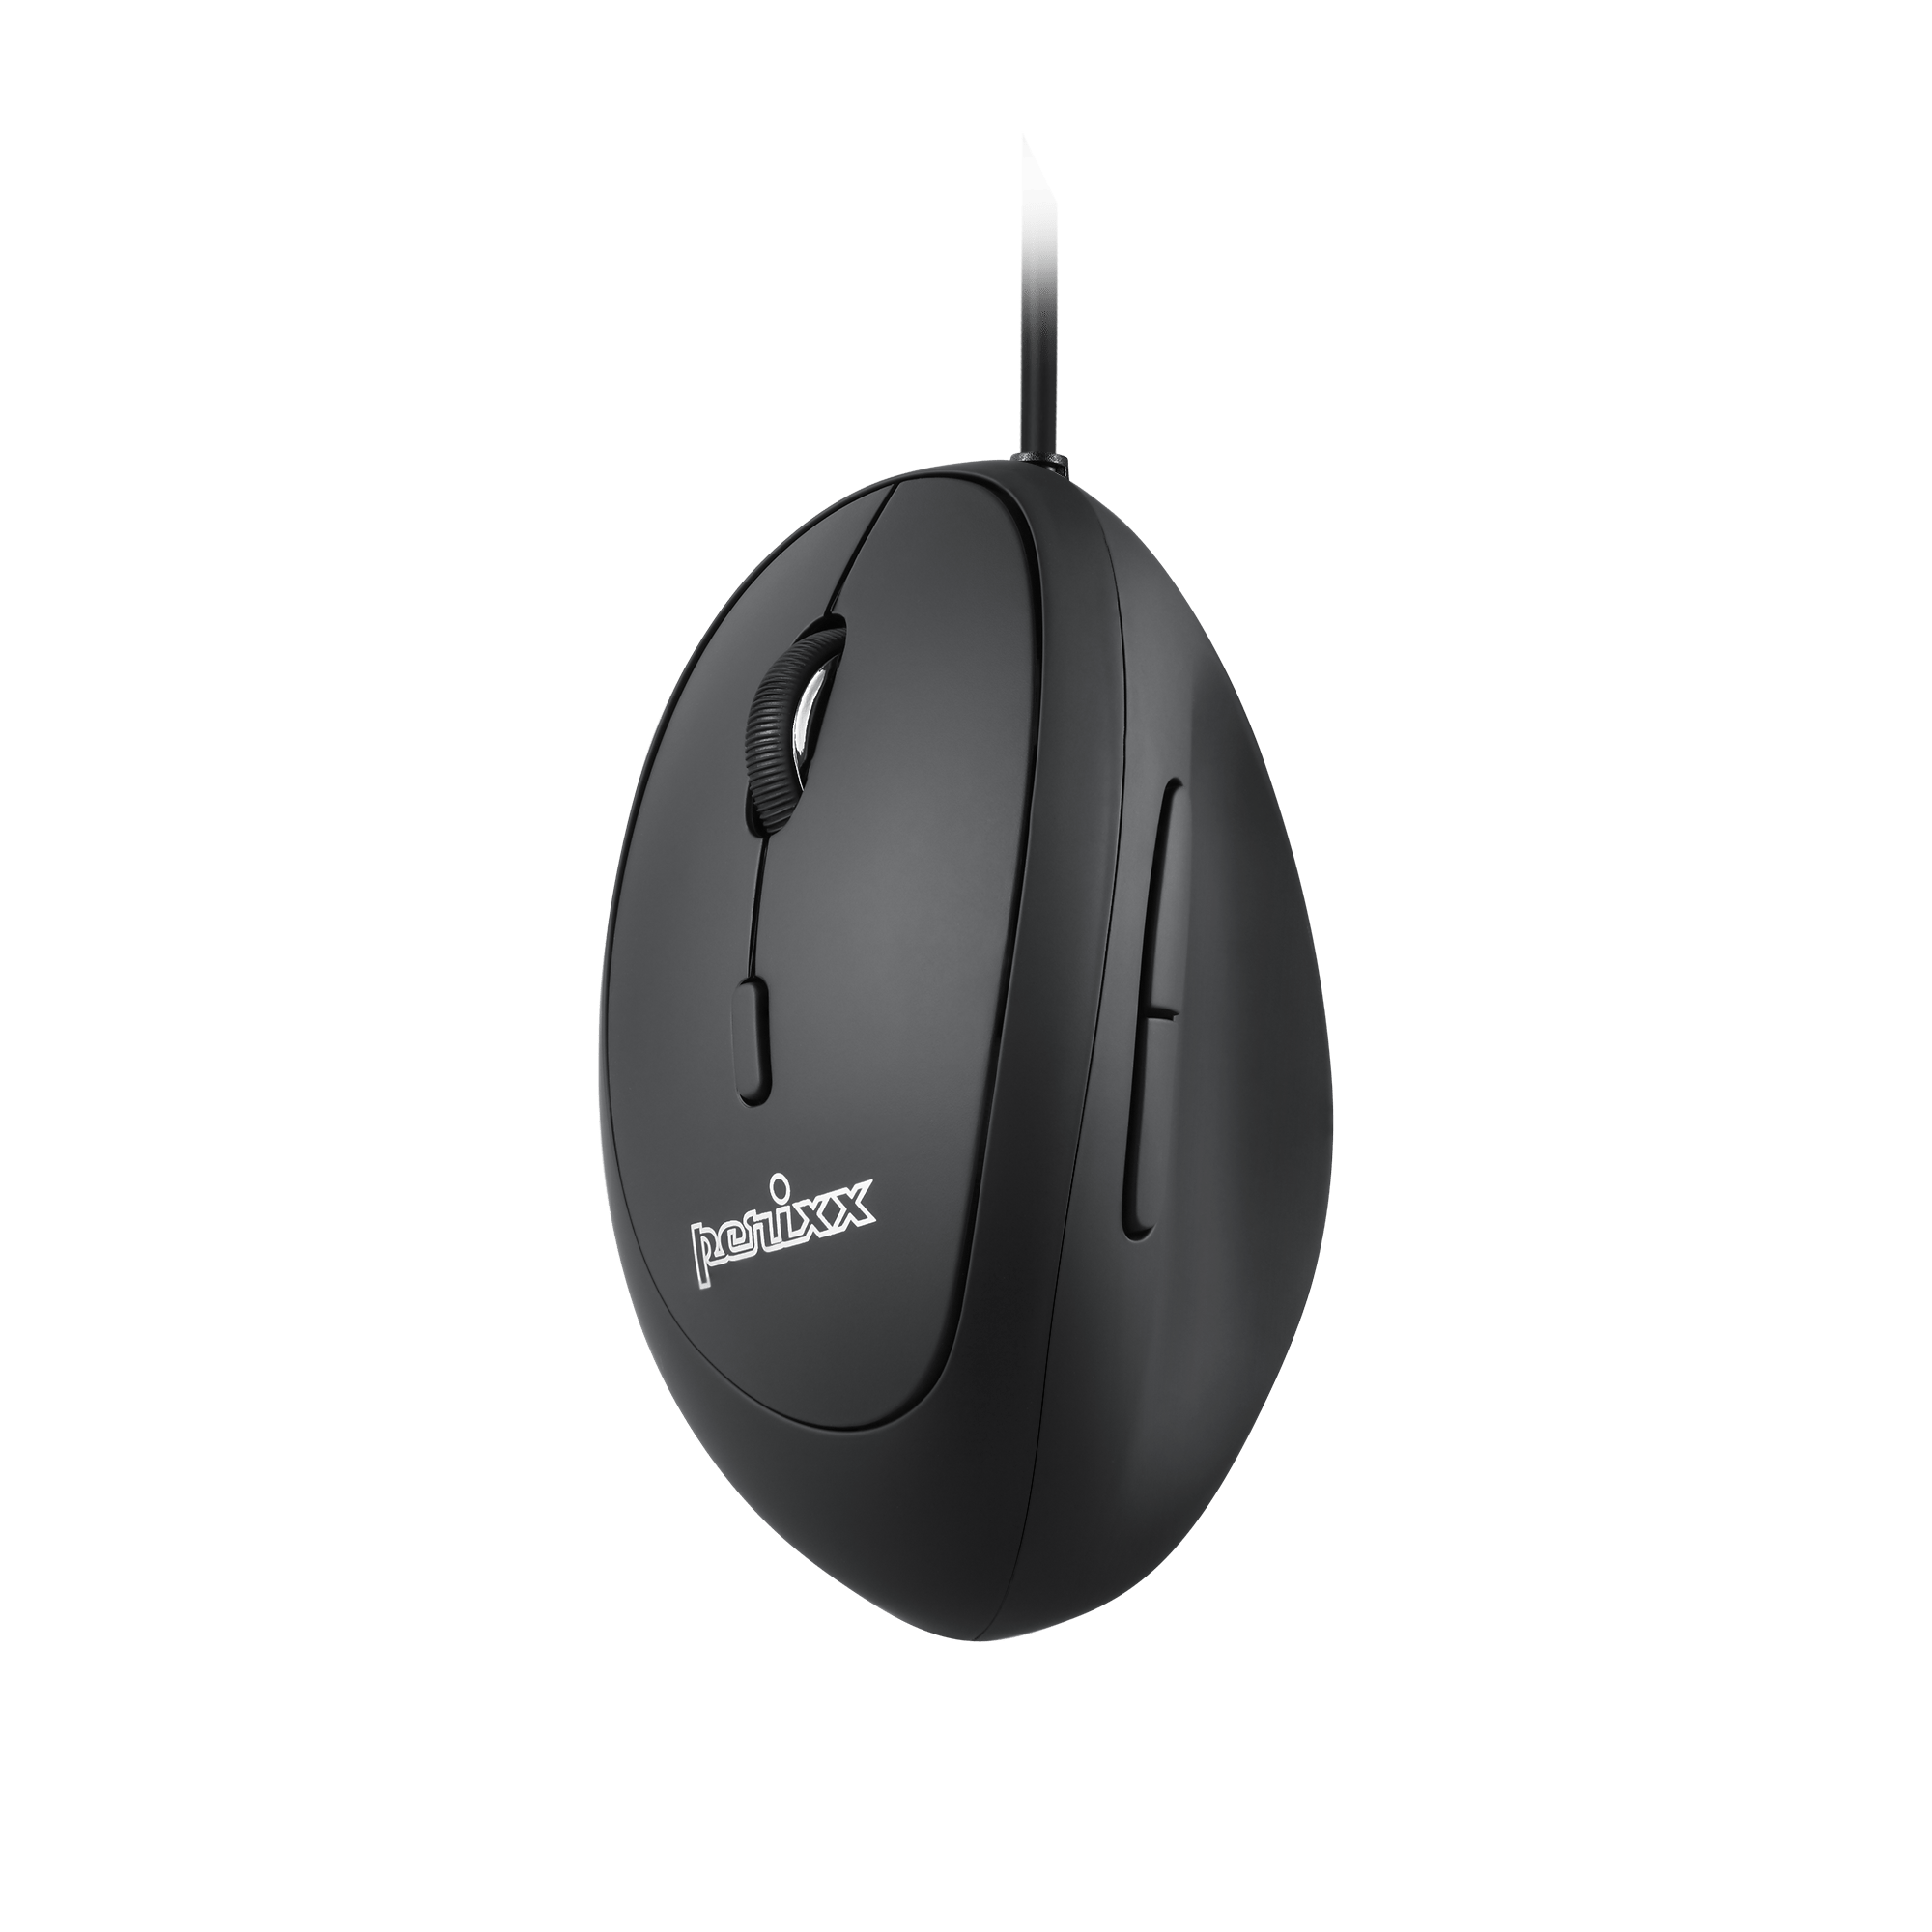 PERIMICE-519 L - Left-Handed Wired Ergonomic Vertical Mouse Silent Click - Perixx Europe